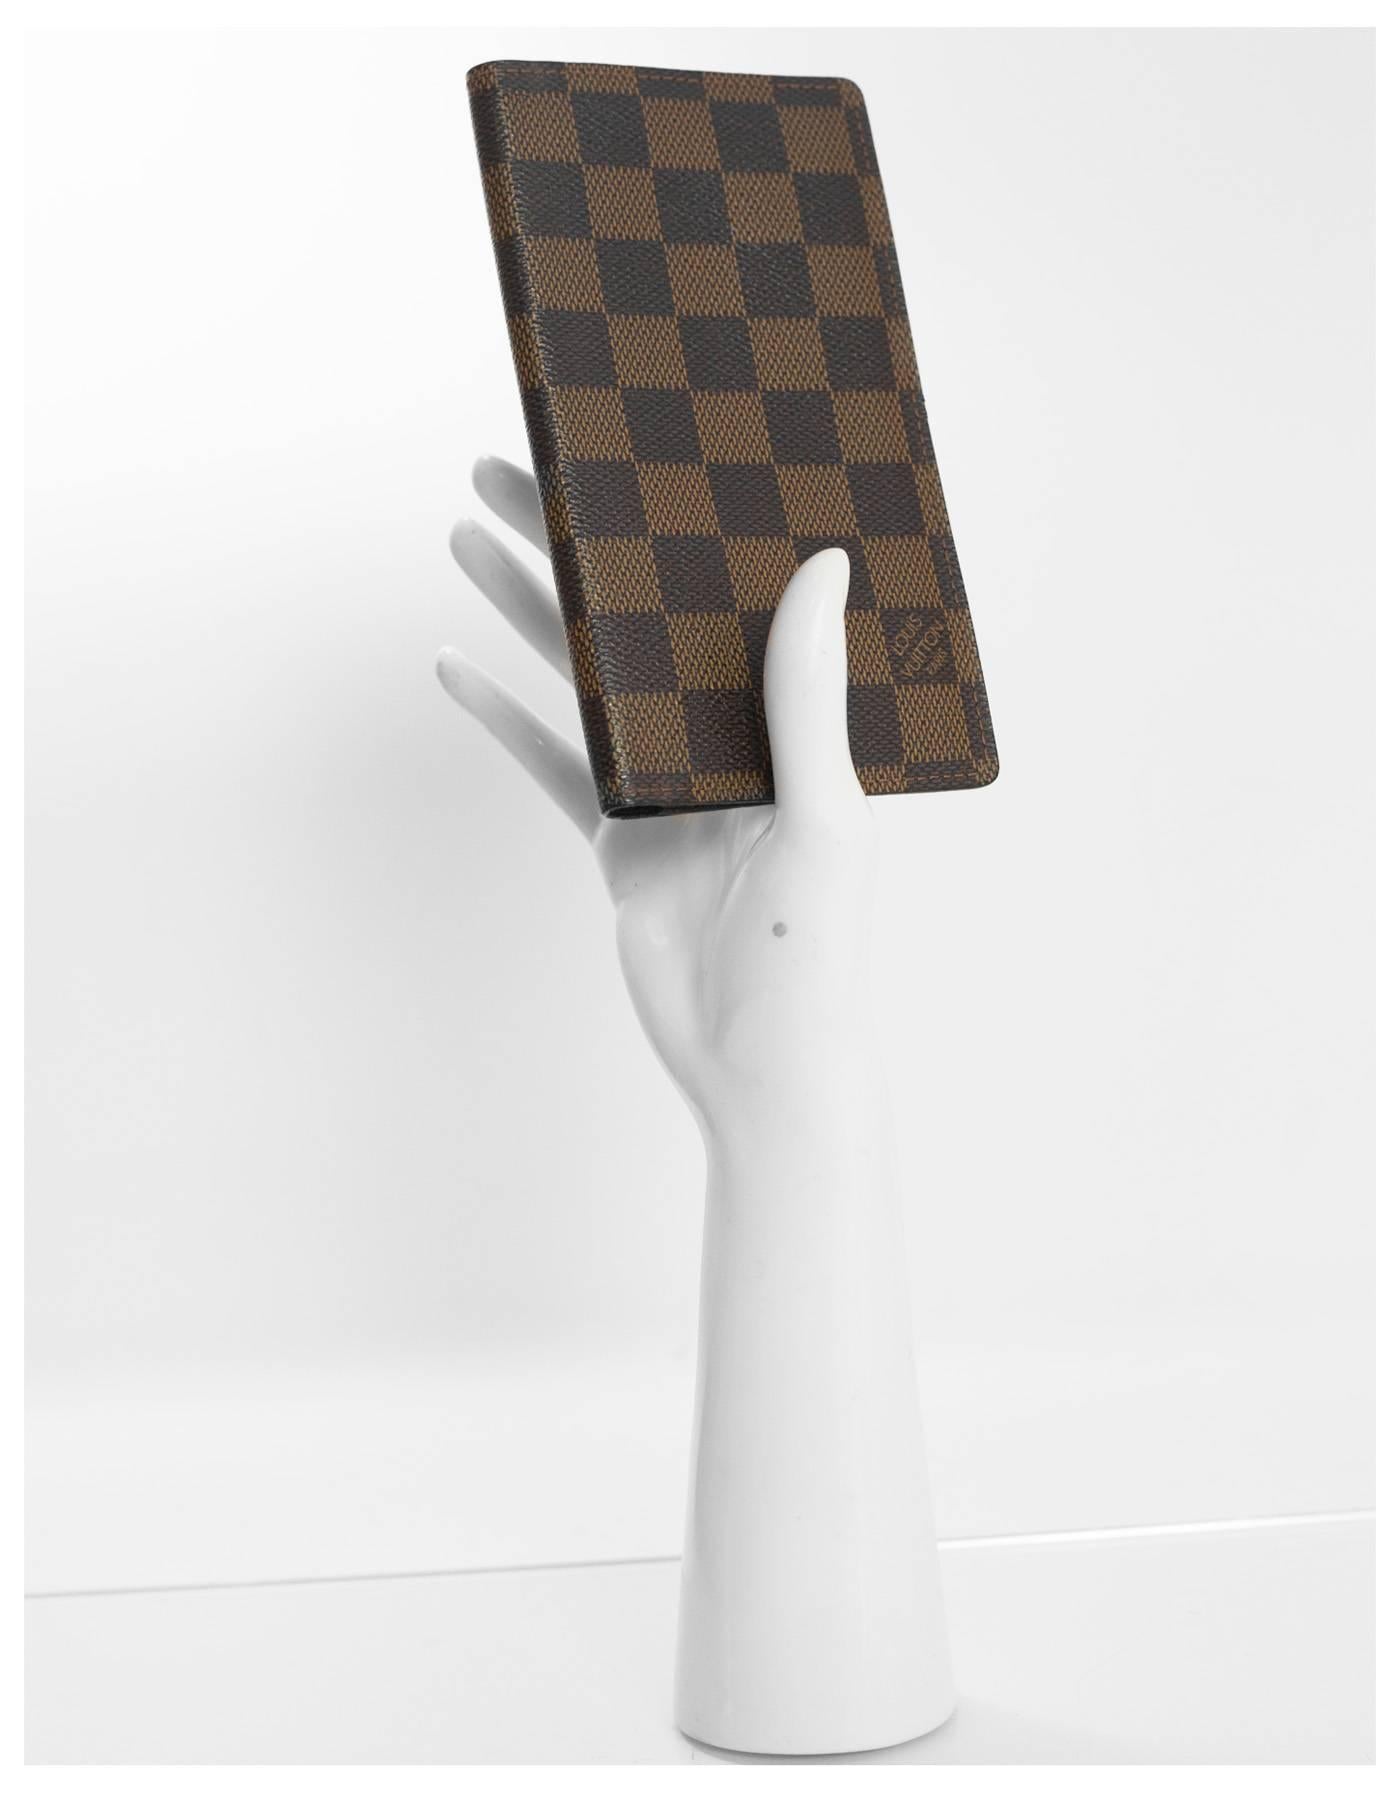 Louis Vuitton Damier Checkbook Cover

Made In: Spain
Year of Production: 2001
Color: Brown
Hardware: None
Materials: Coated Canvas
Lining: Brown coated canvas
Closure/Opening: Bi-fold
Exterior Pockets: None
Interior Pockets: Three slit card